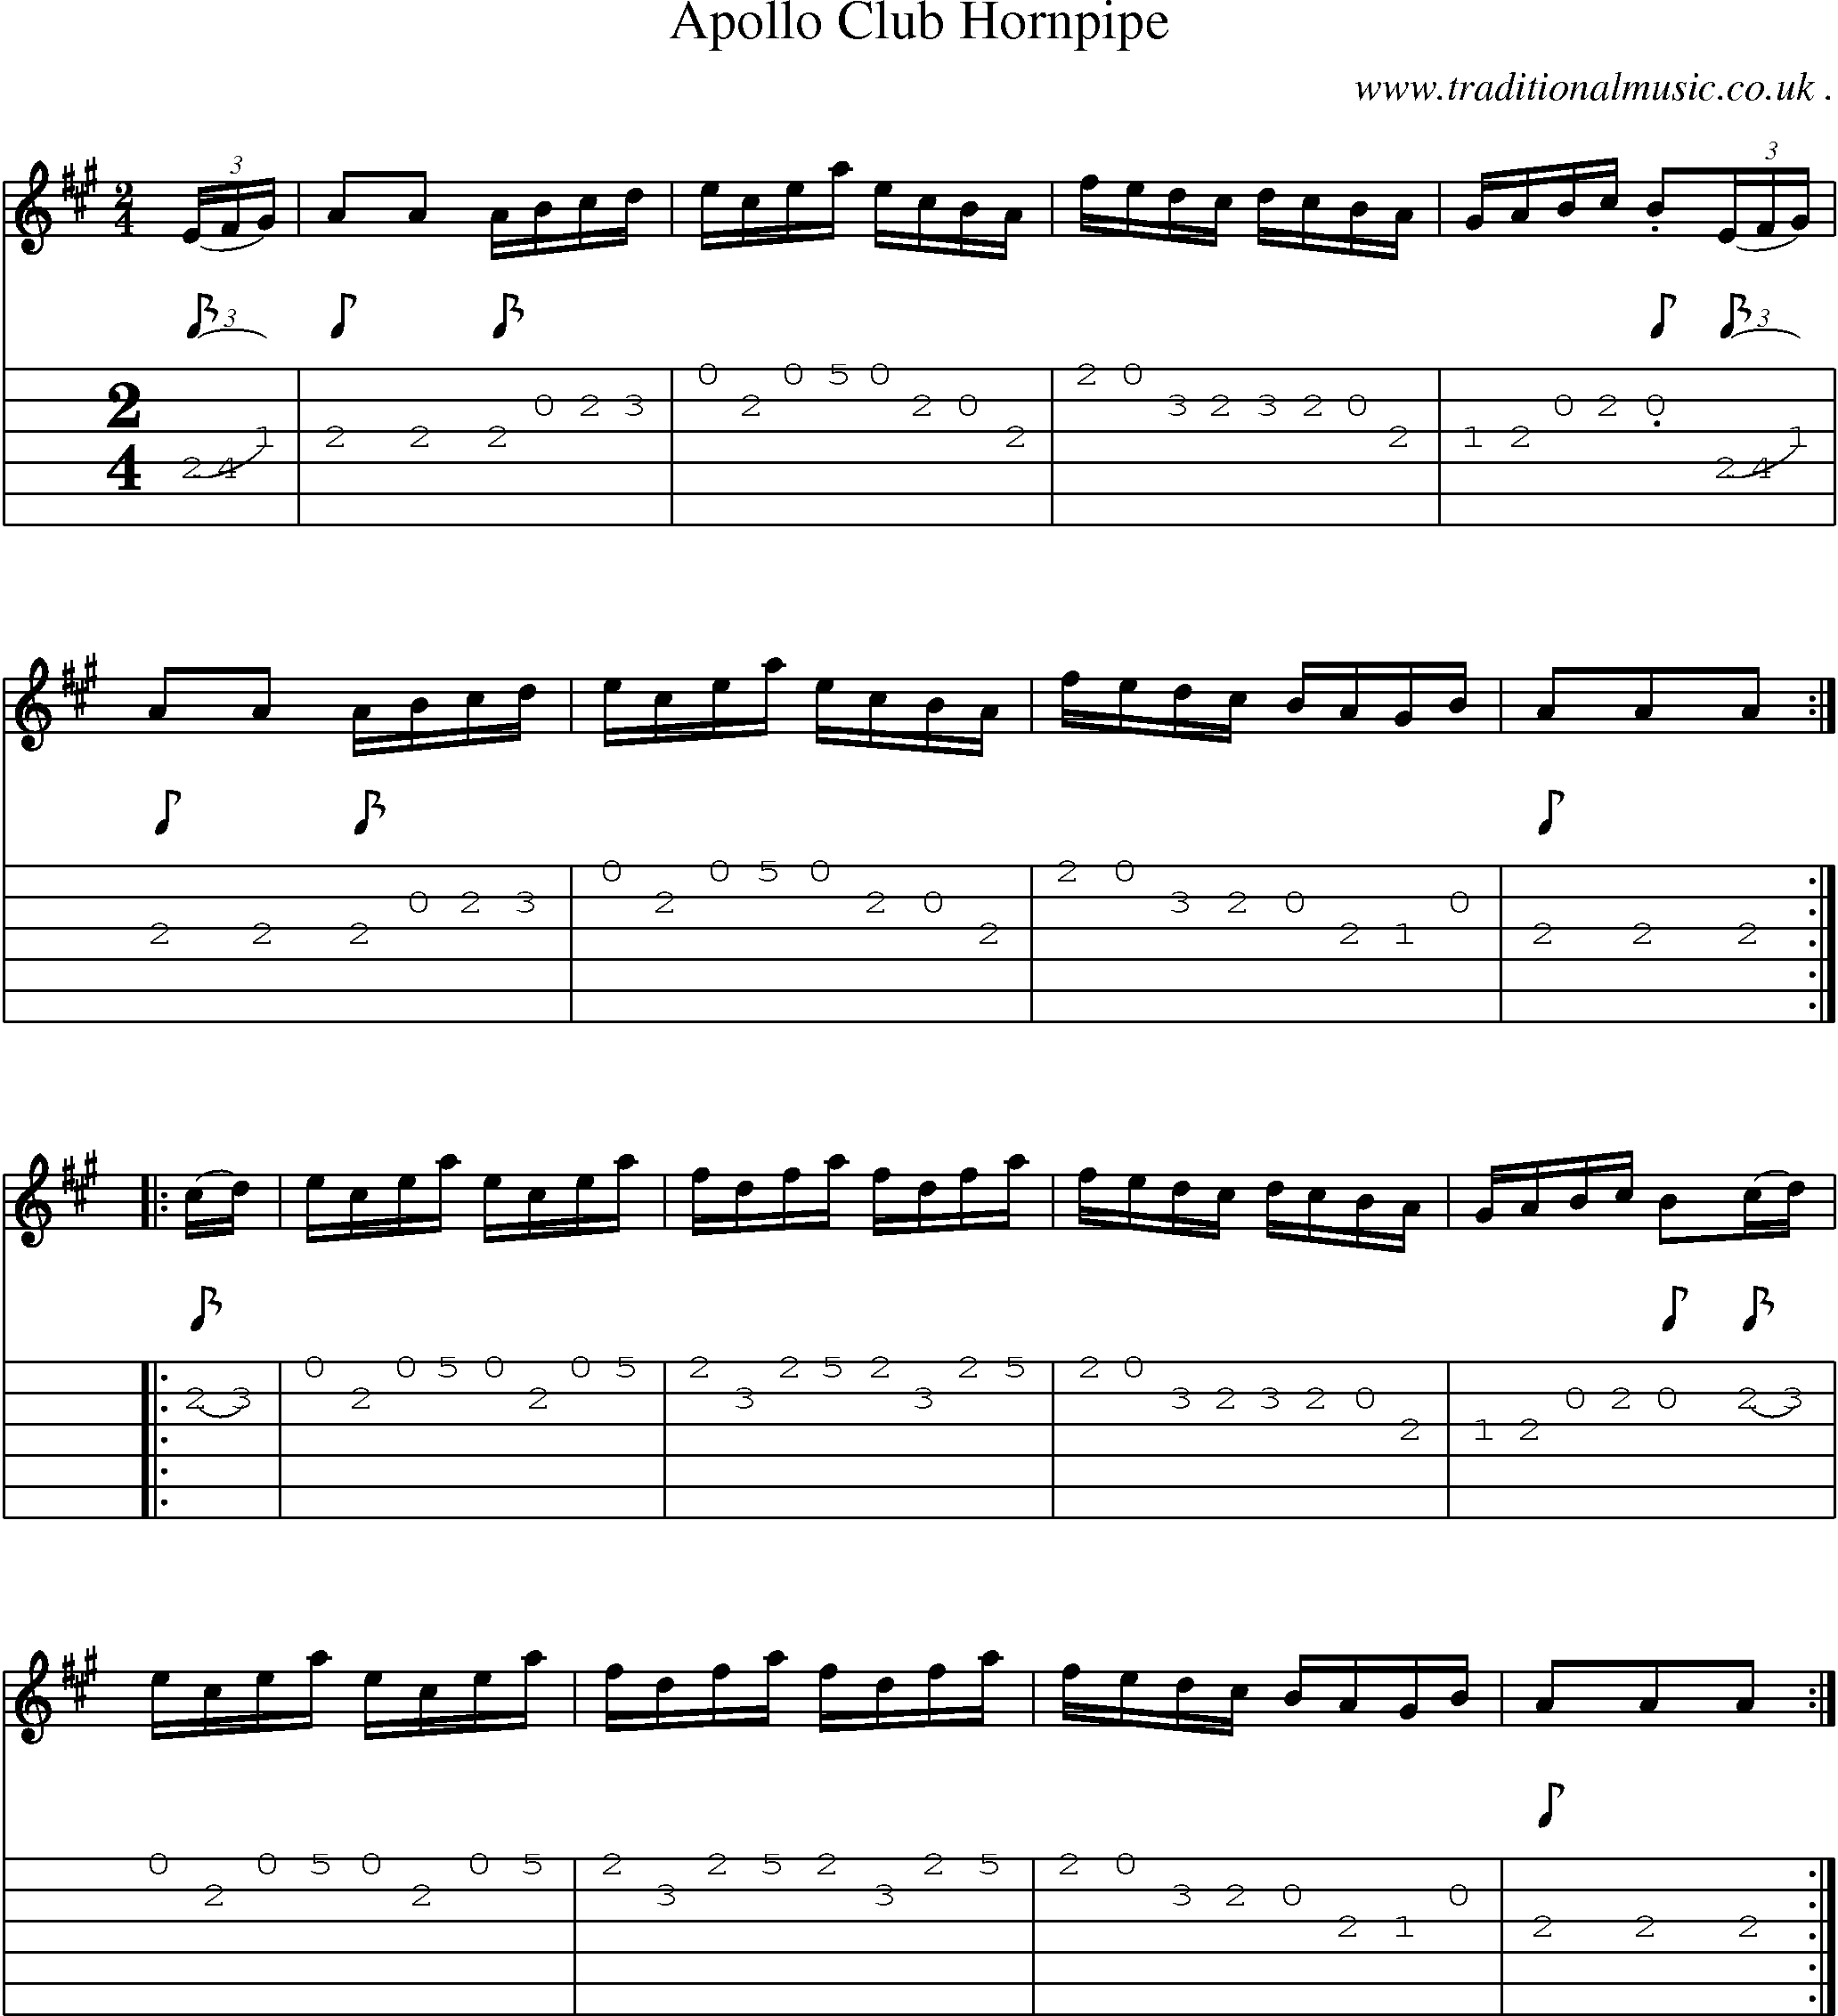 Sheet-Music and Guitar Tabs for Apollo Club Hornpipe